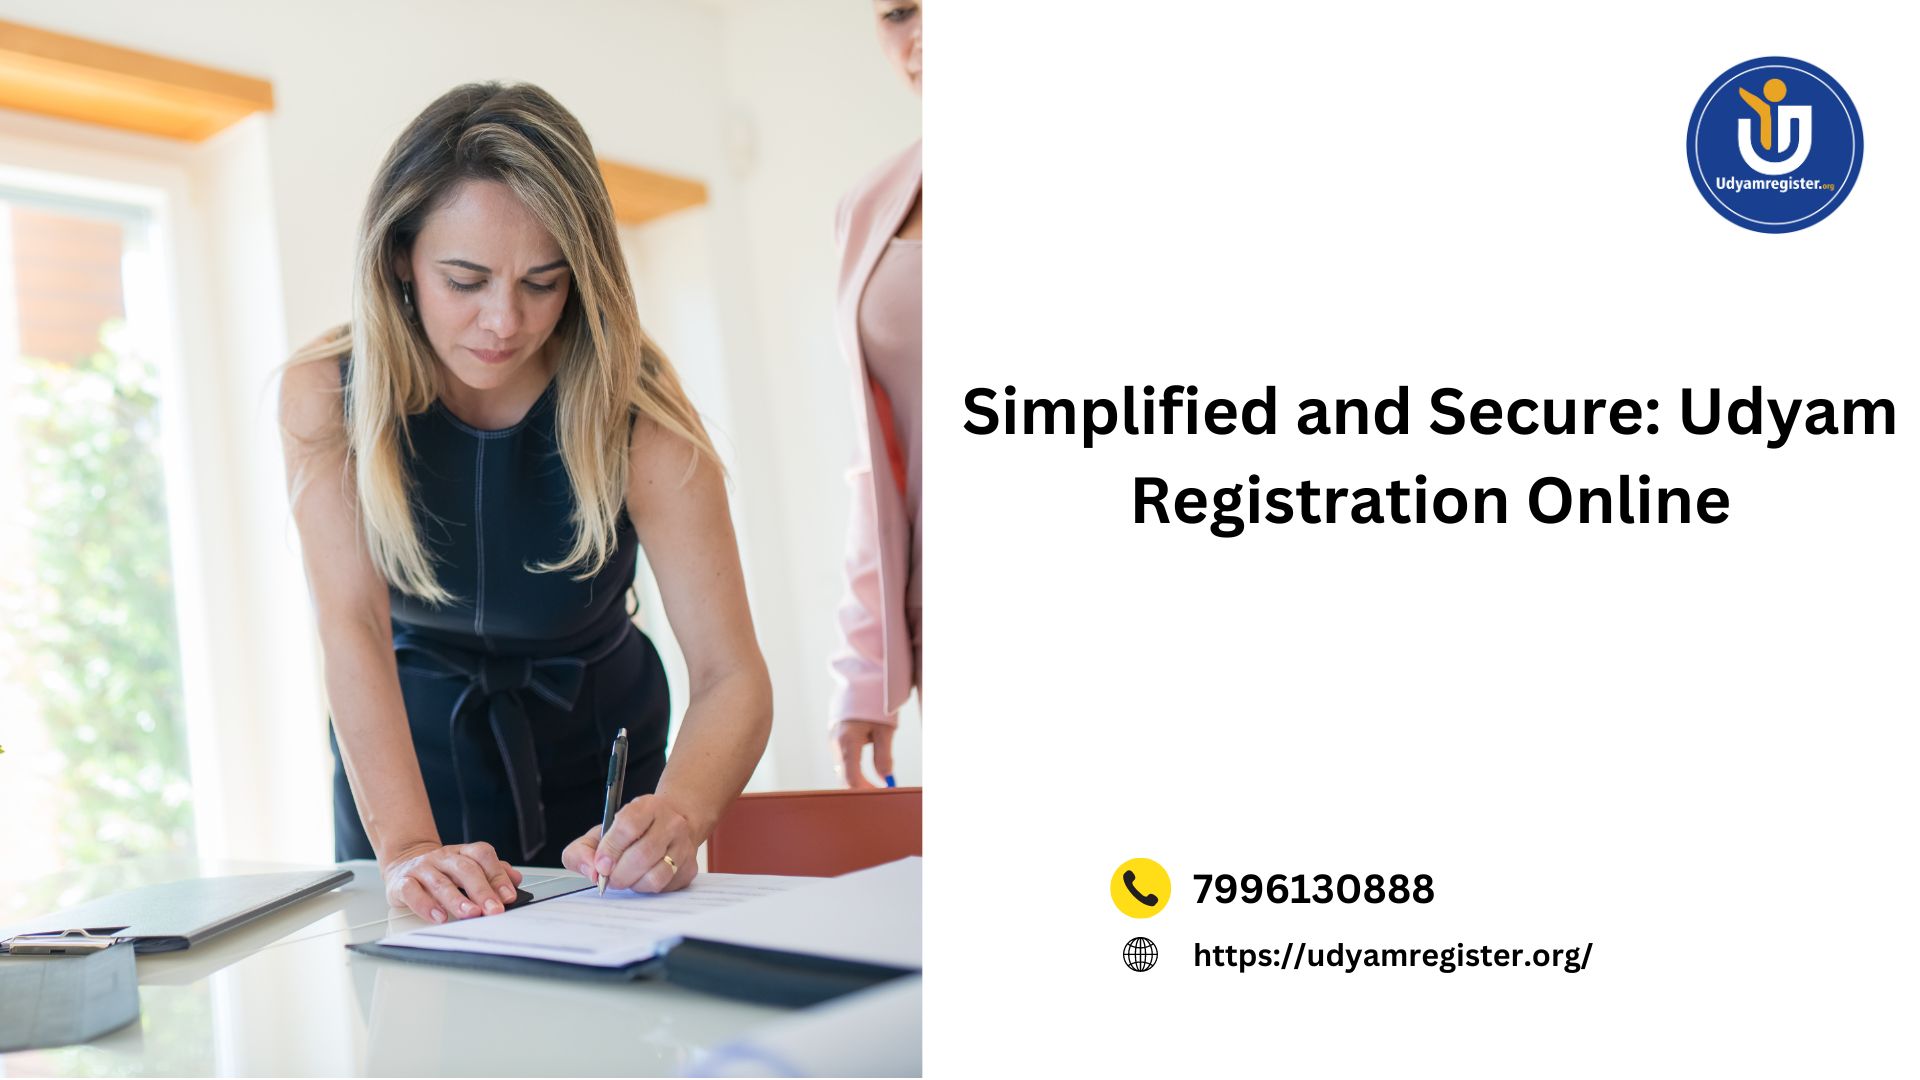 Simplified and Secure Udyam Registration Online